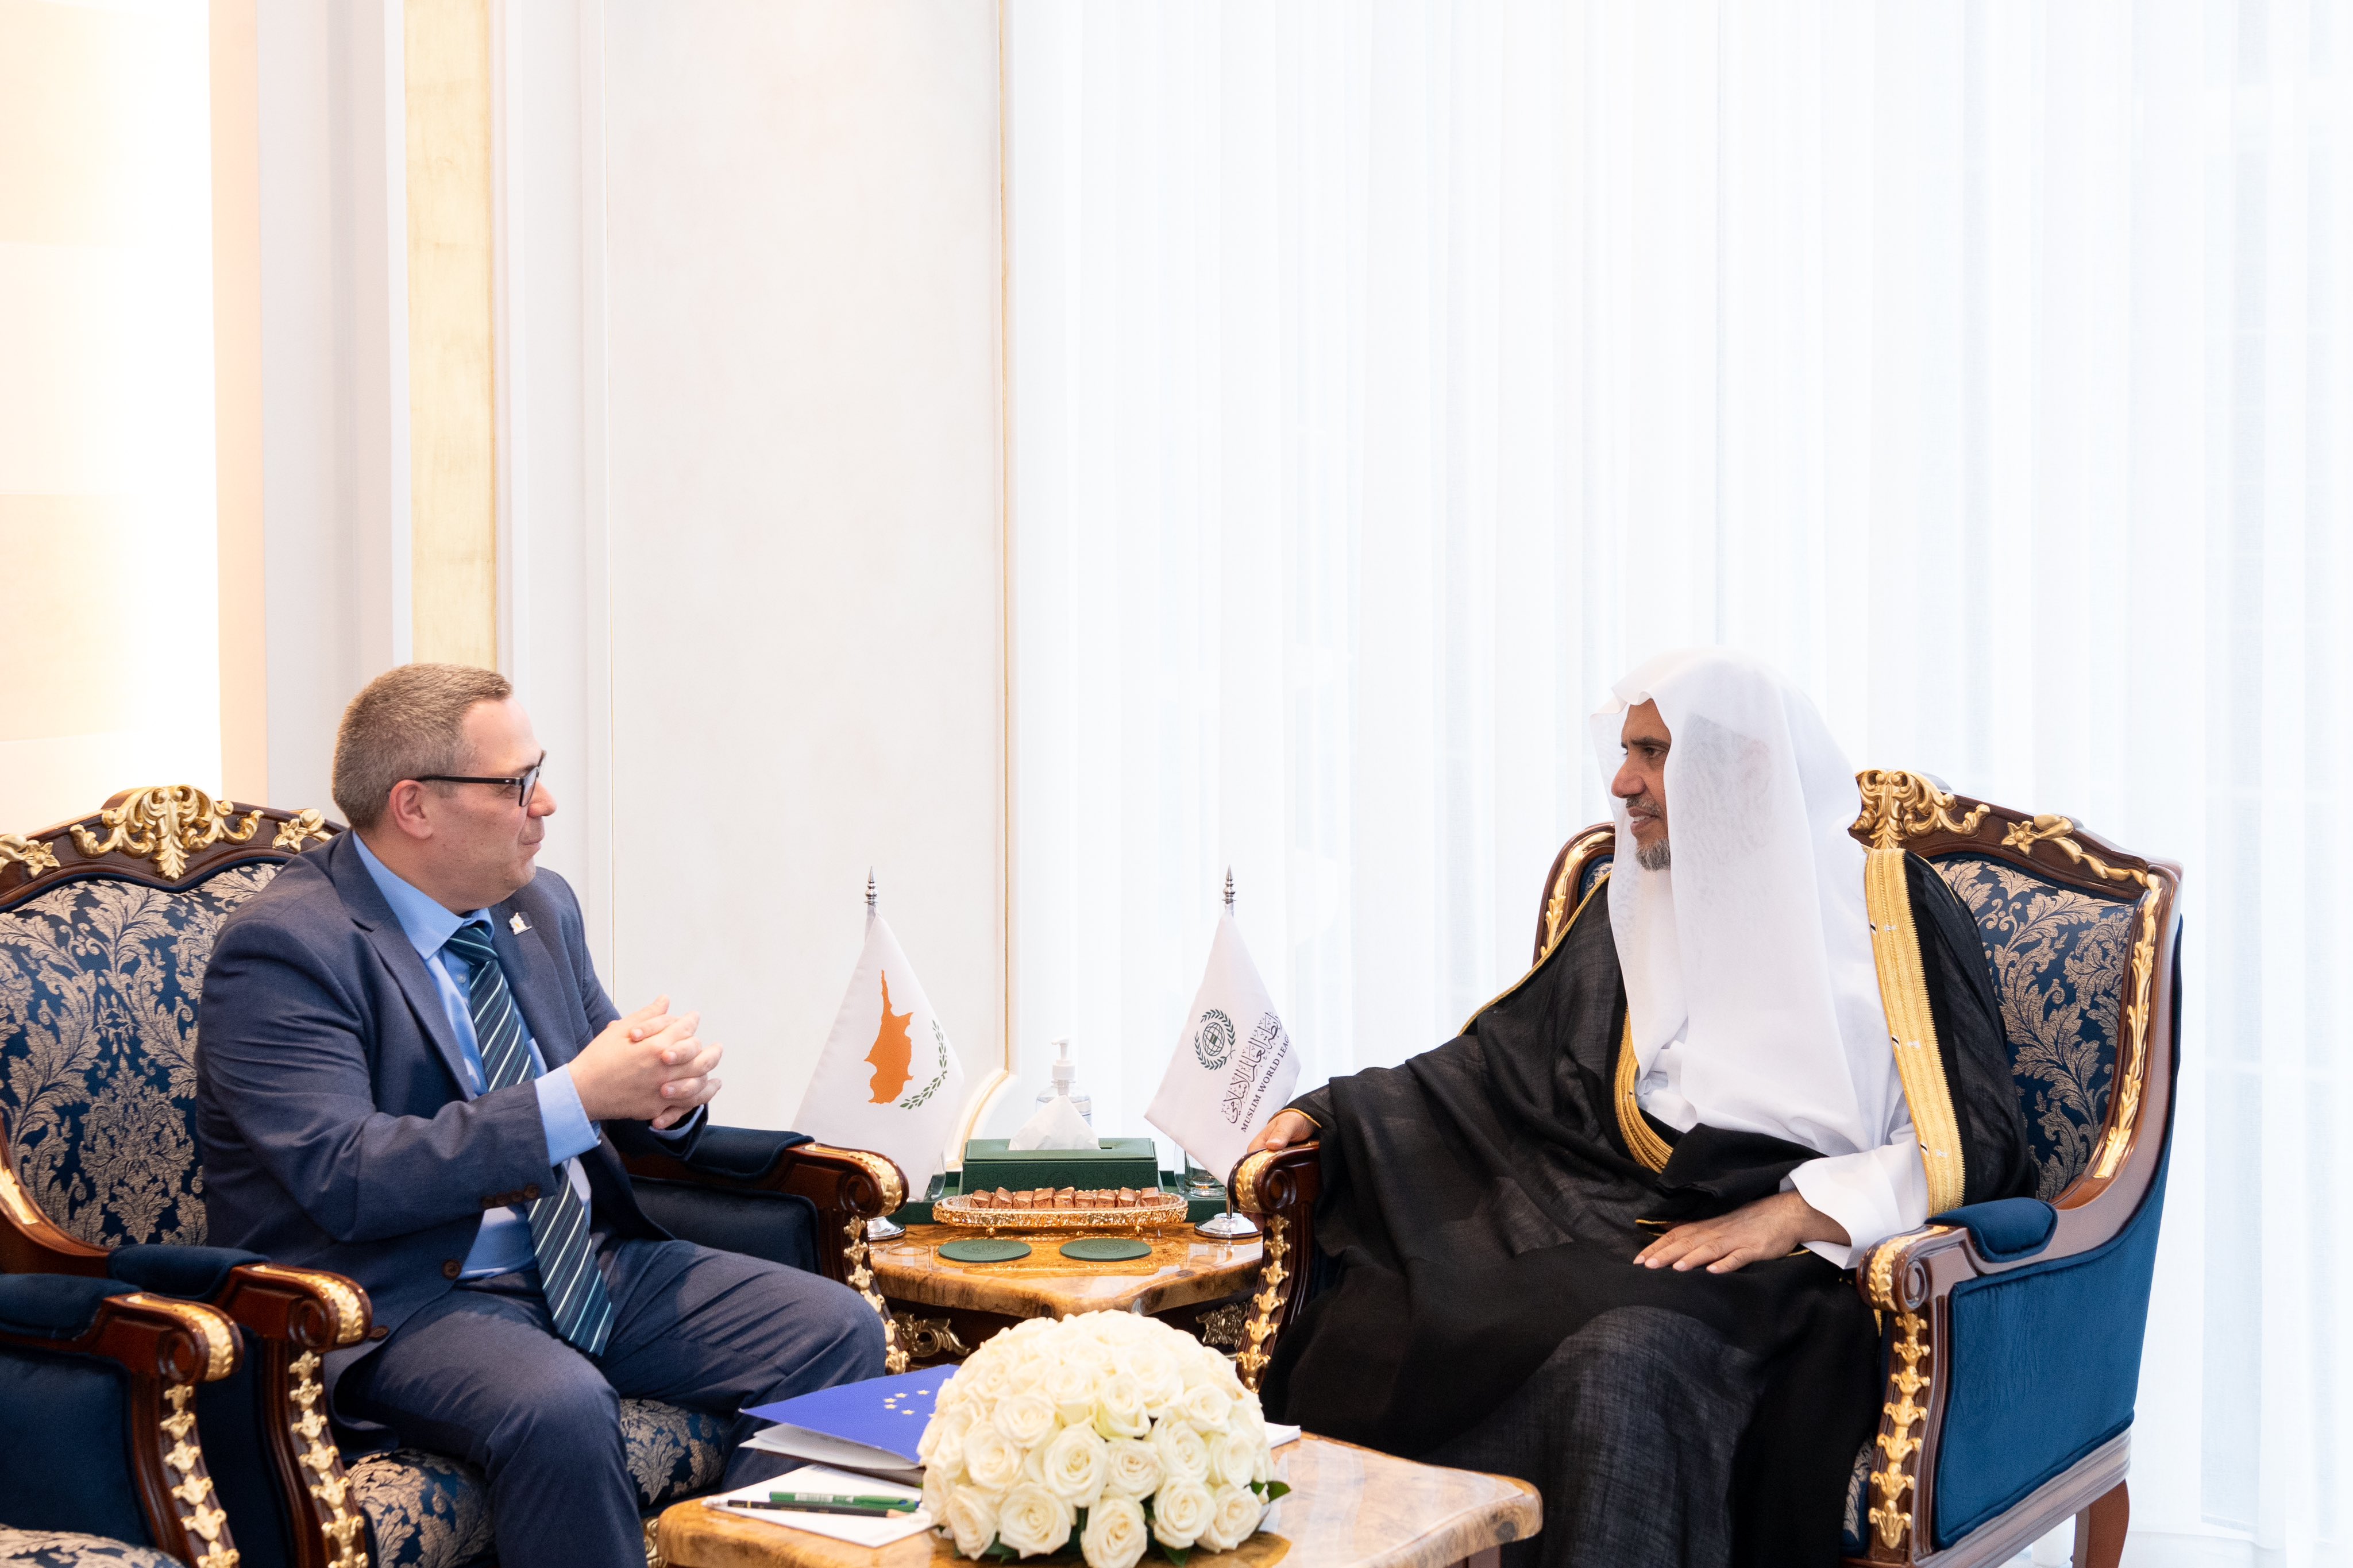 At his office in Riyadh, His Excellency Sheikh Dr.Mohammed Al-issa , Secretary-General of the MWL, met with His Excellency Ambassador Michael Alexis Phedonos-Vadet, Ambassador of Cyprus to the Kingdom of Saudi Arabia.